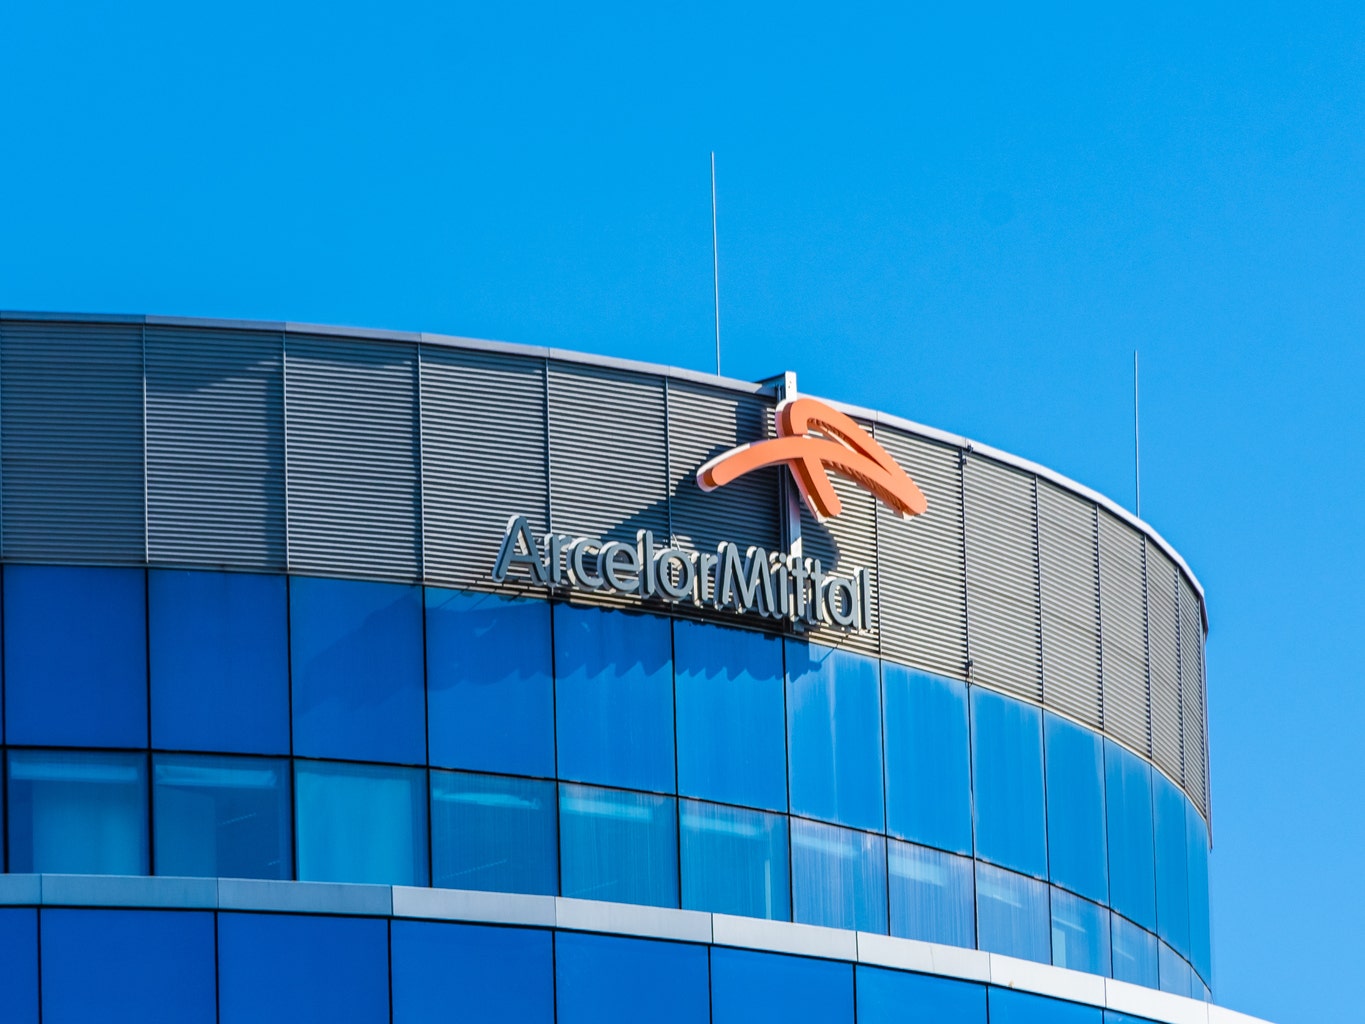 Luxembourg to buy half of ArcelorMittal headquarters